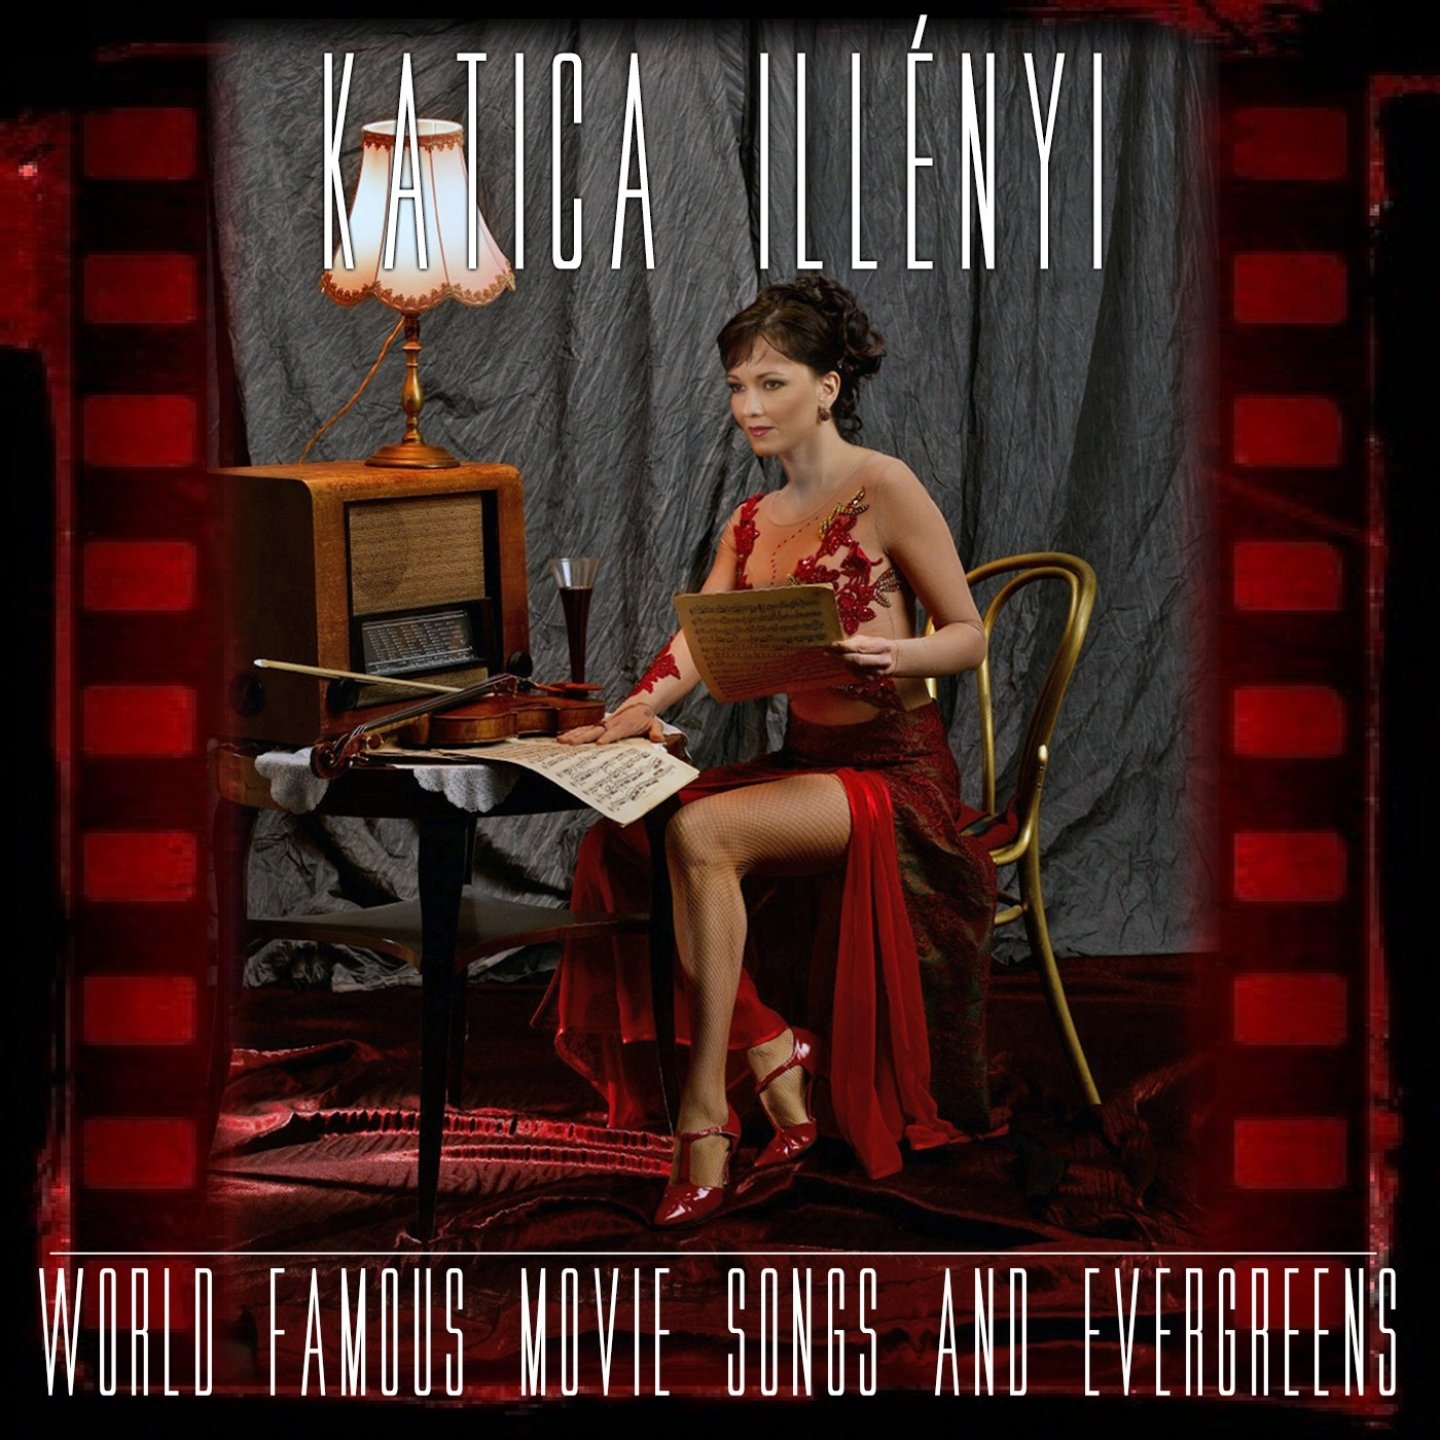 World Famous Movie Songs and Evergreens — Katica Illényi | Last.fm